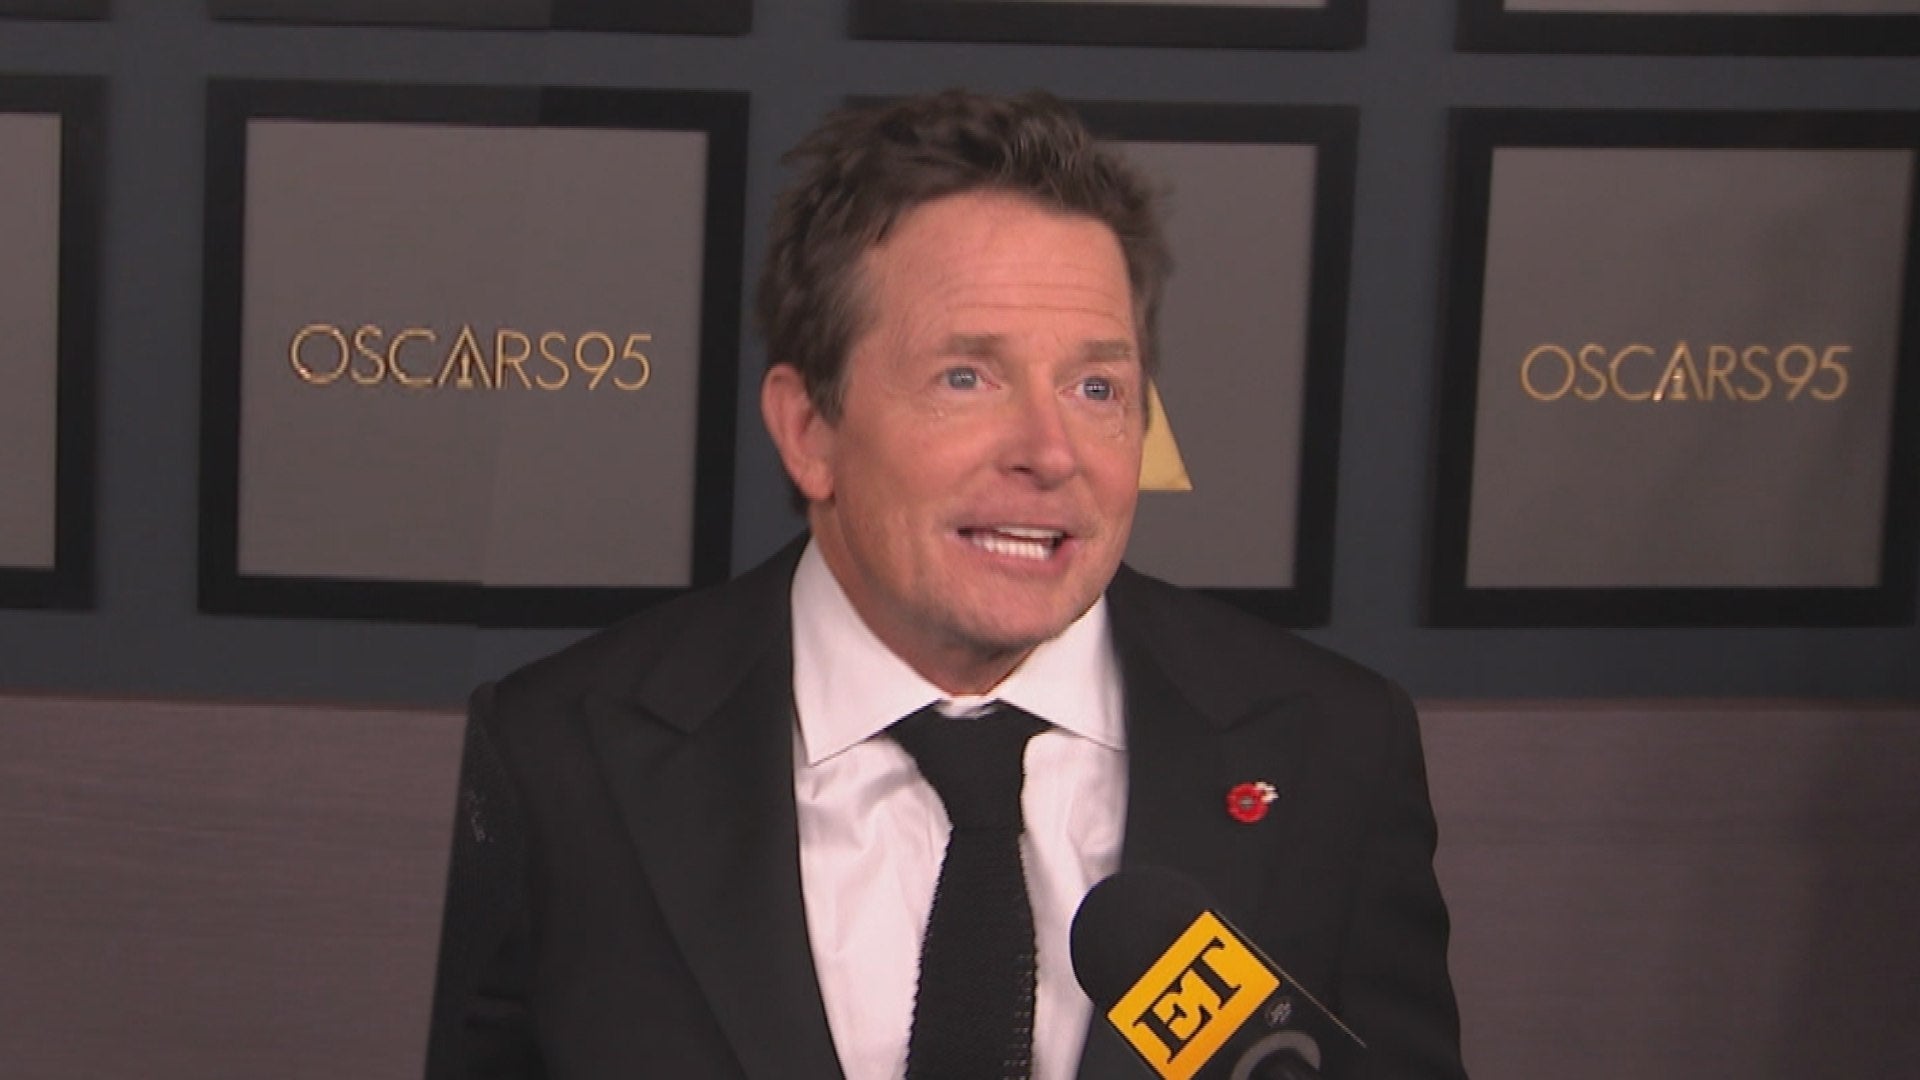 Michael J. Fox Reflects on Honorary Oscar Win and the Projects That Mean Most to Him (Exclusive)